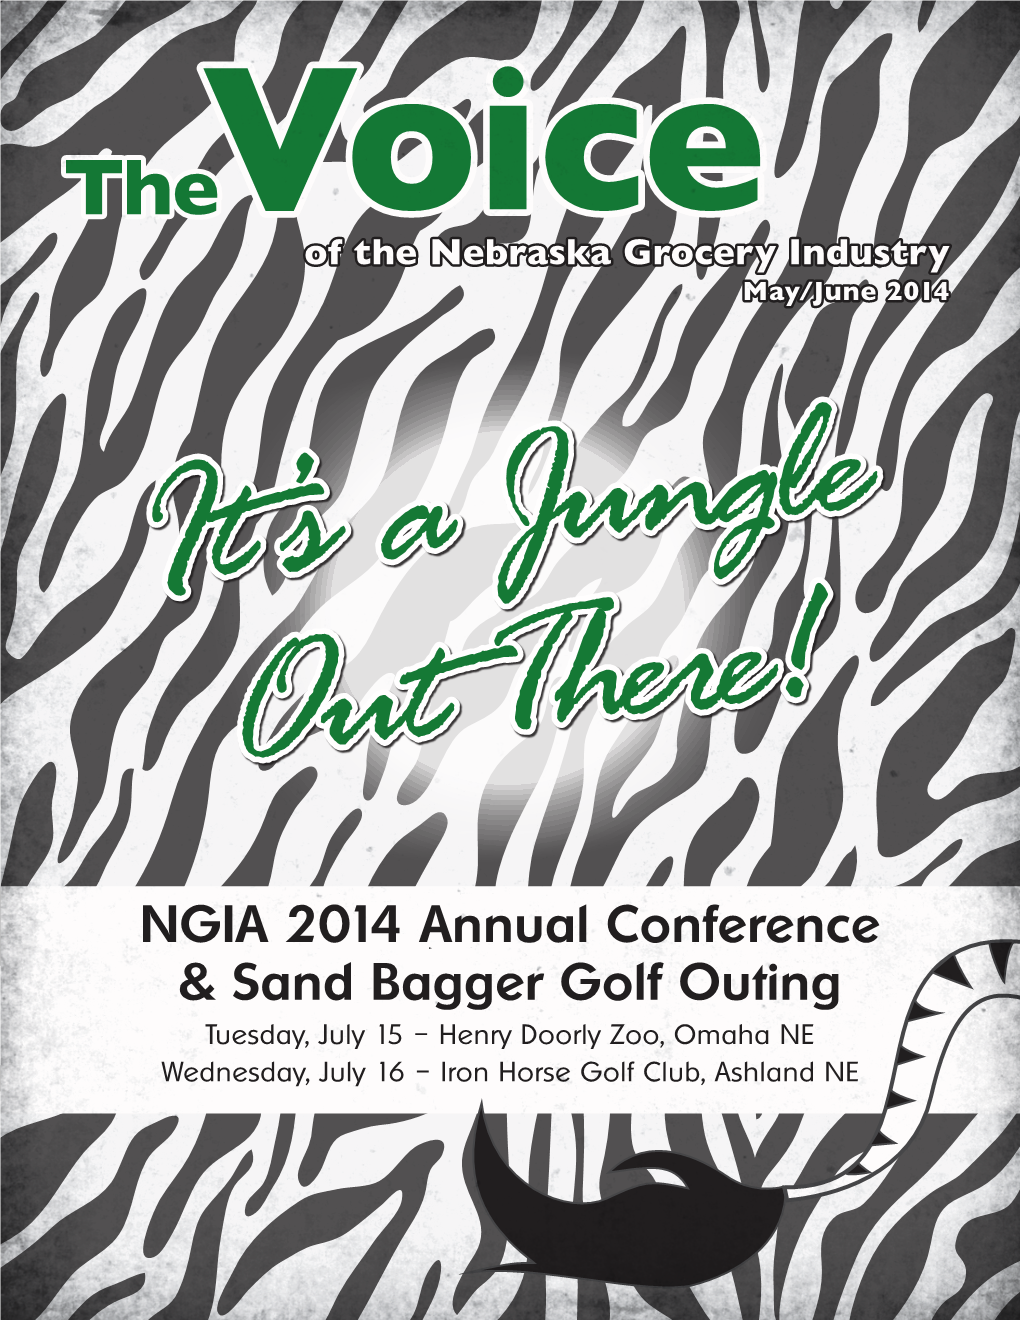 NGIA 2014 Annual Conference & Sand Bagger Golf Outing